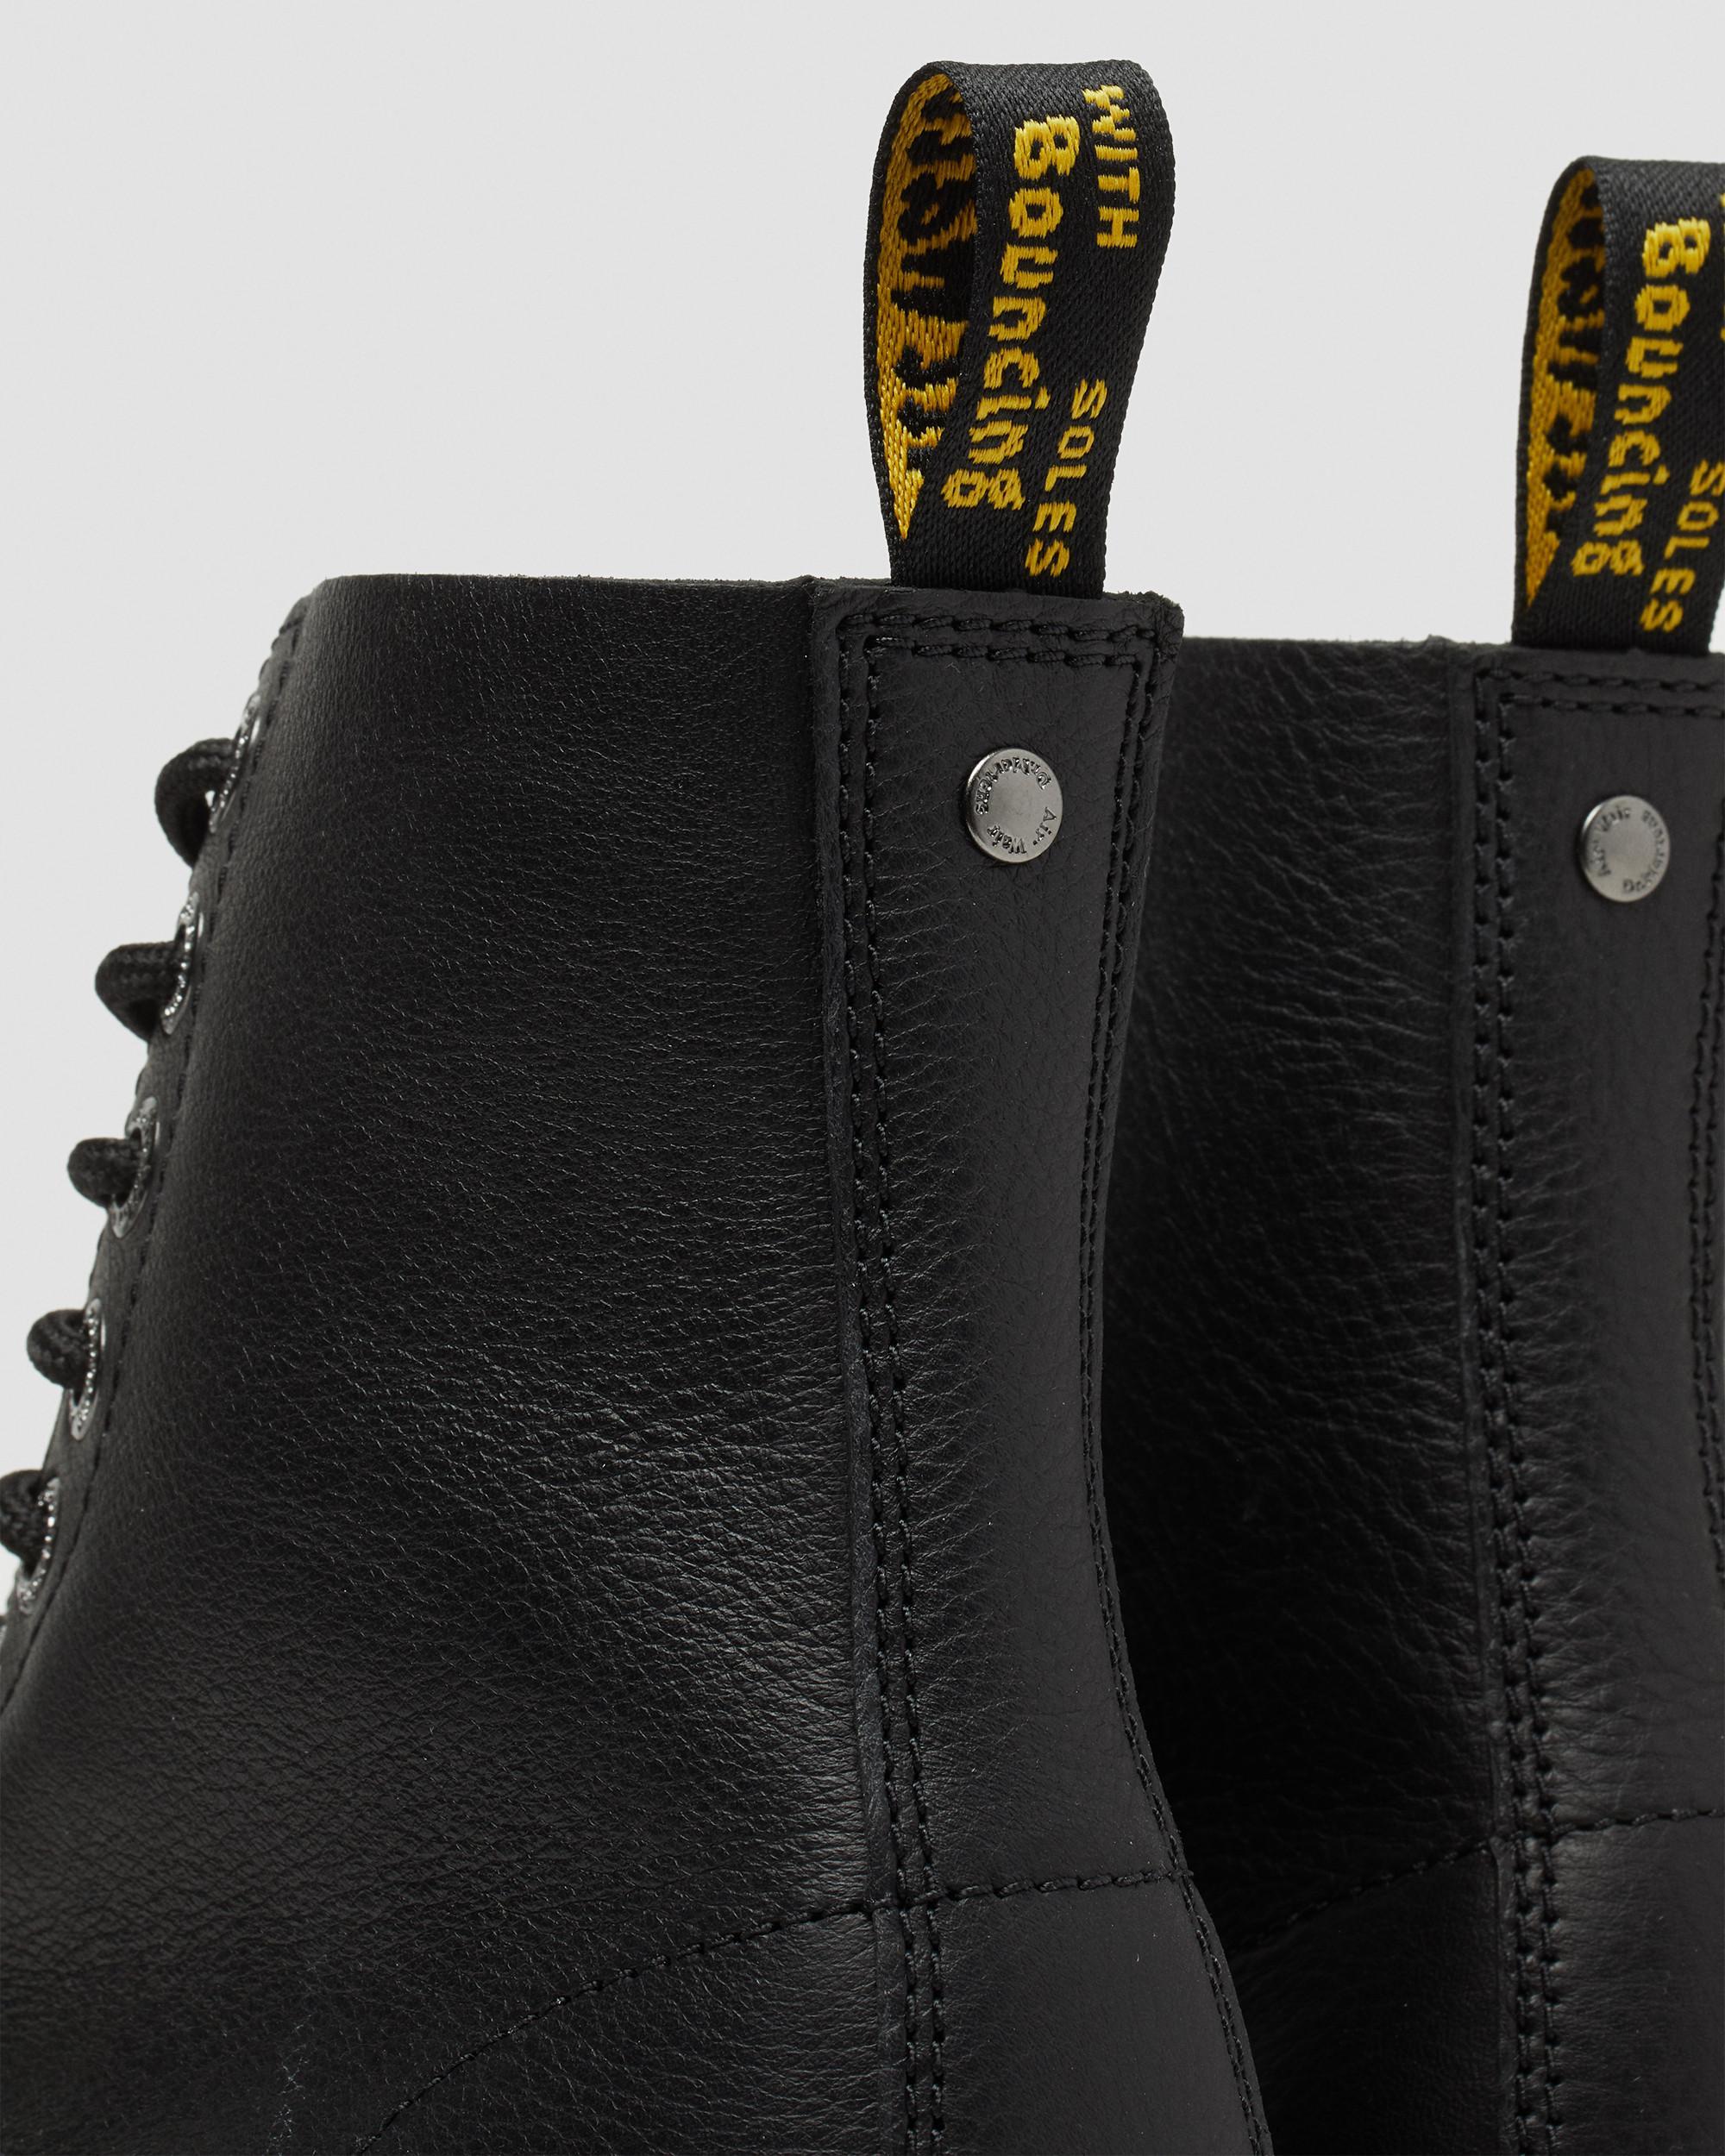 Dr. Martens 1460 Pascal Max Leather Platform Boots in Black | Lyst